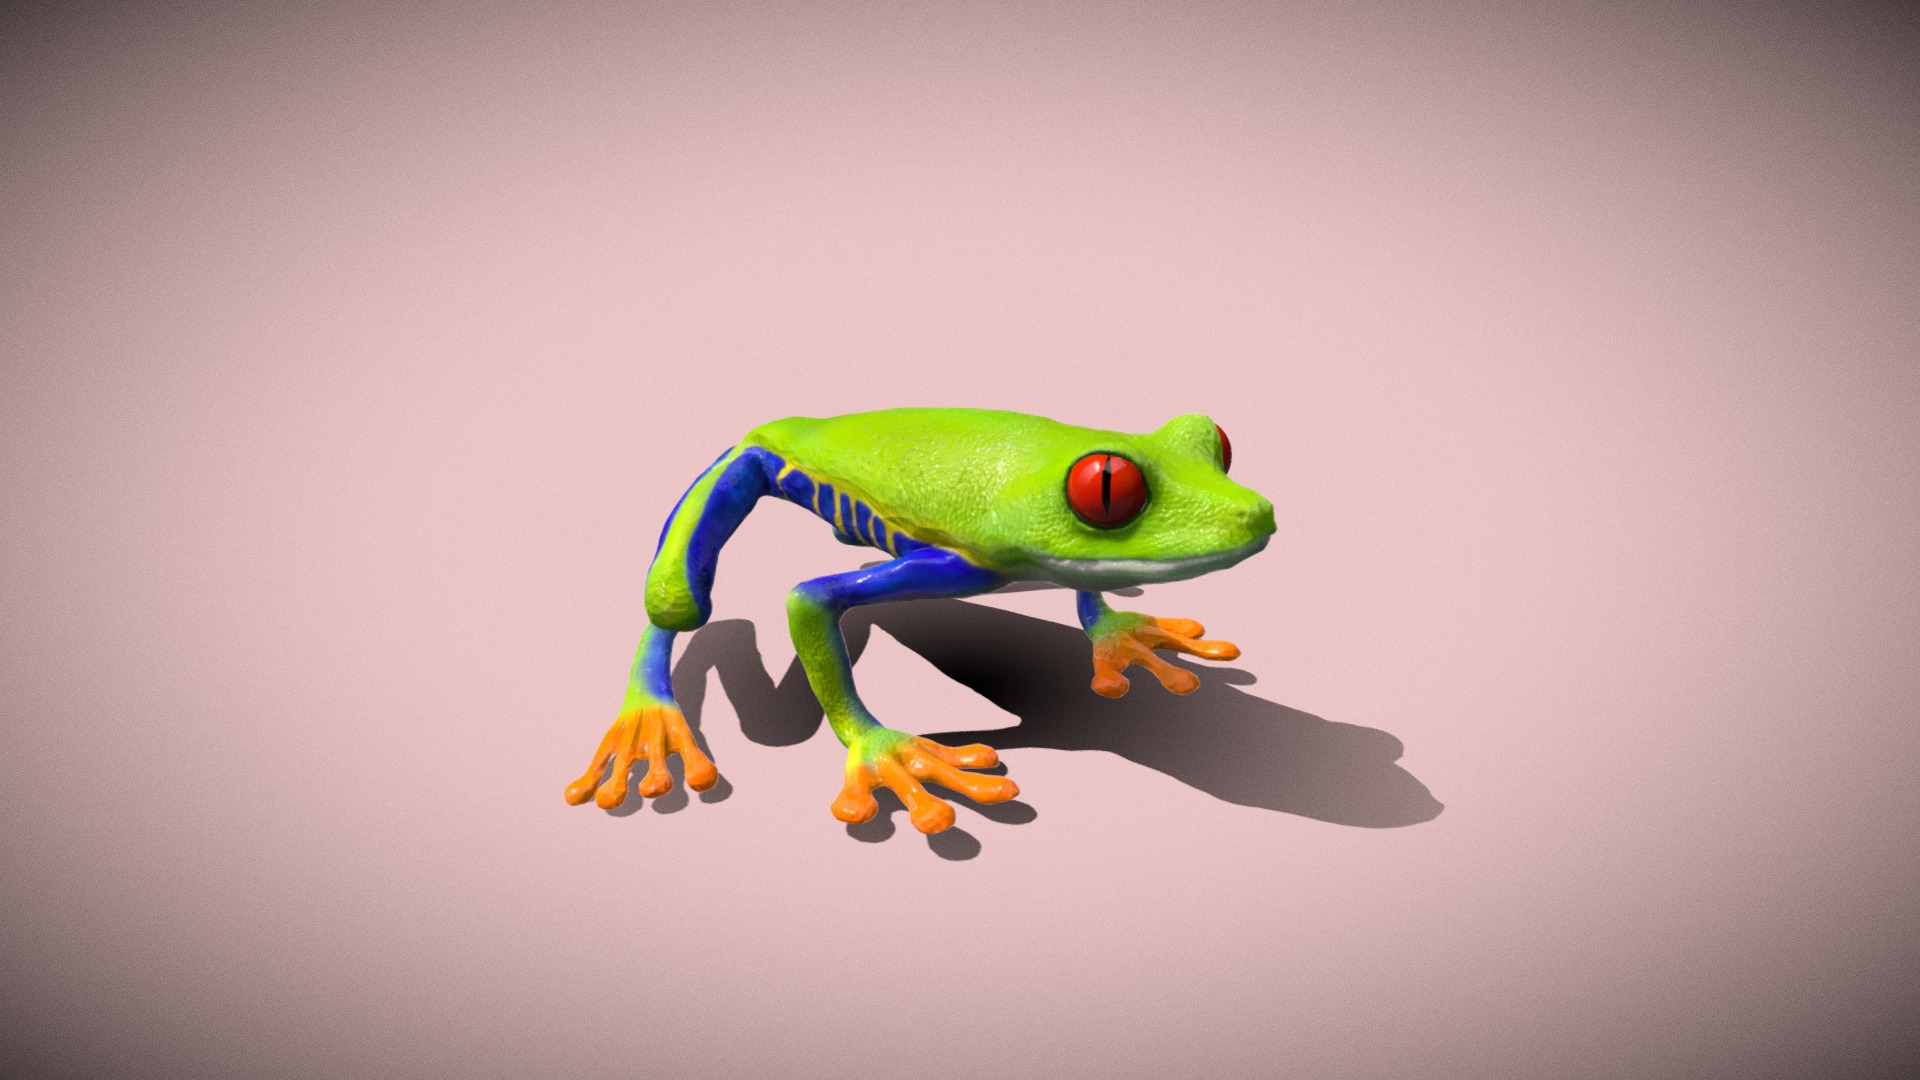 3D model Red eyed tree frog - This is a 3D model of the Red eyed tree frog. The 3D model is about a green frog on a white background.